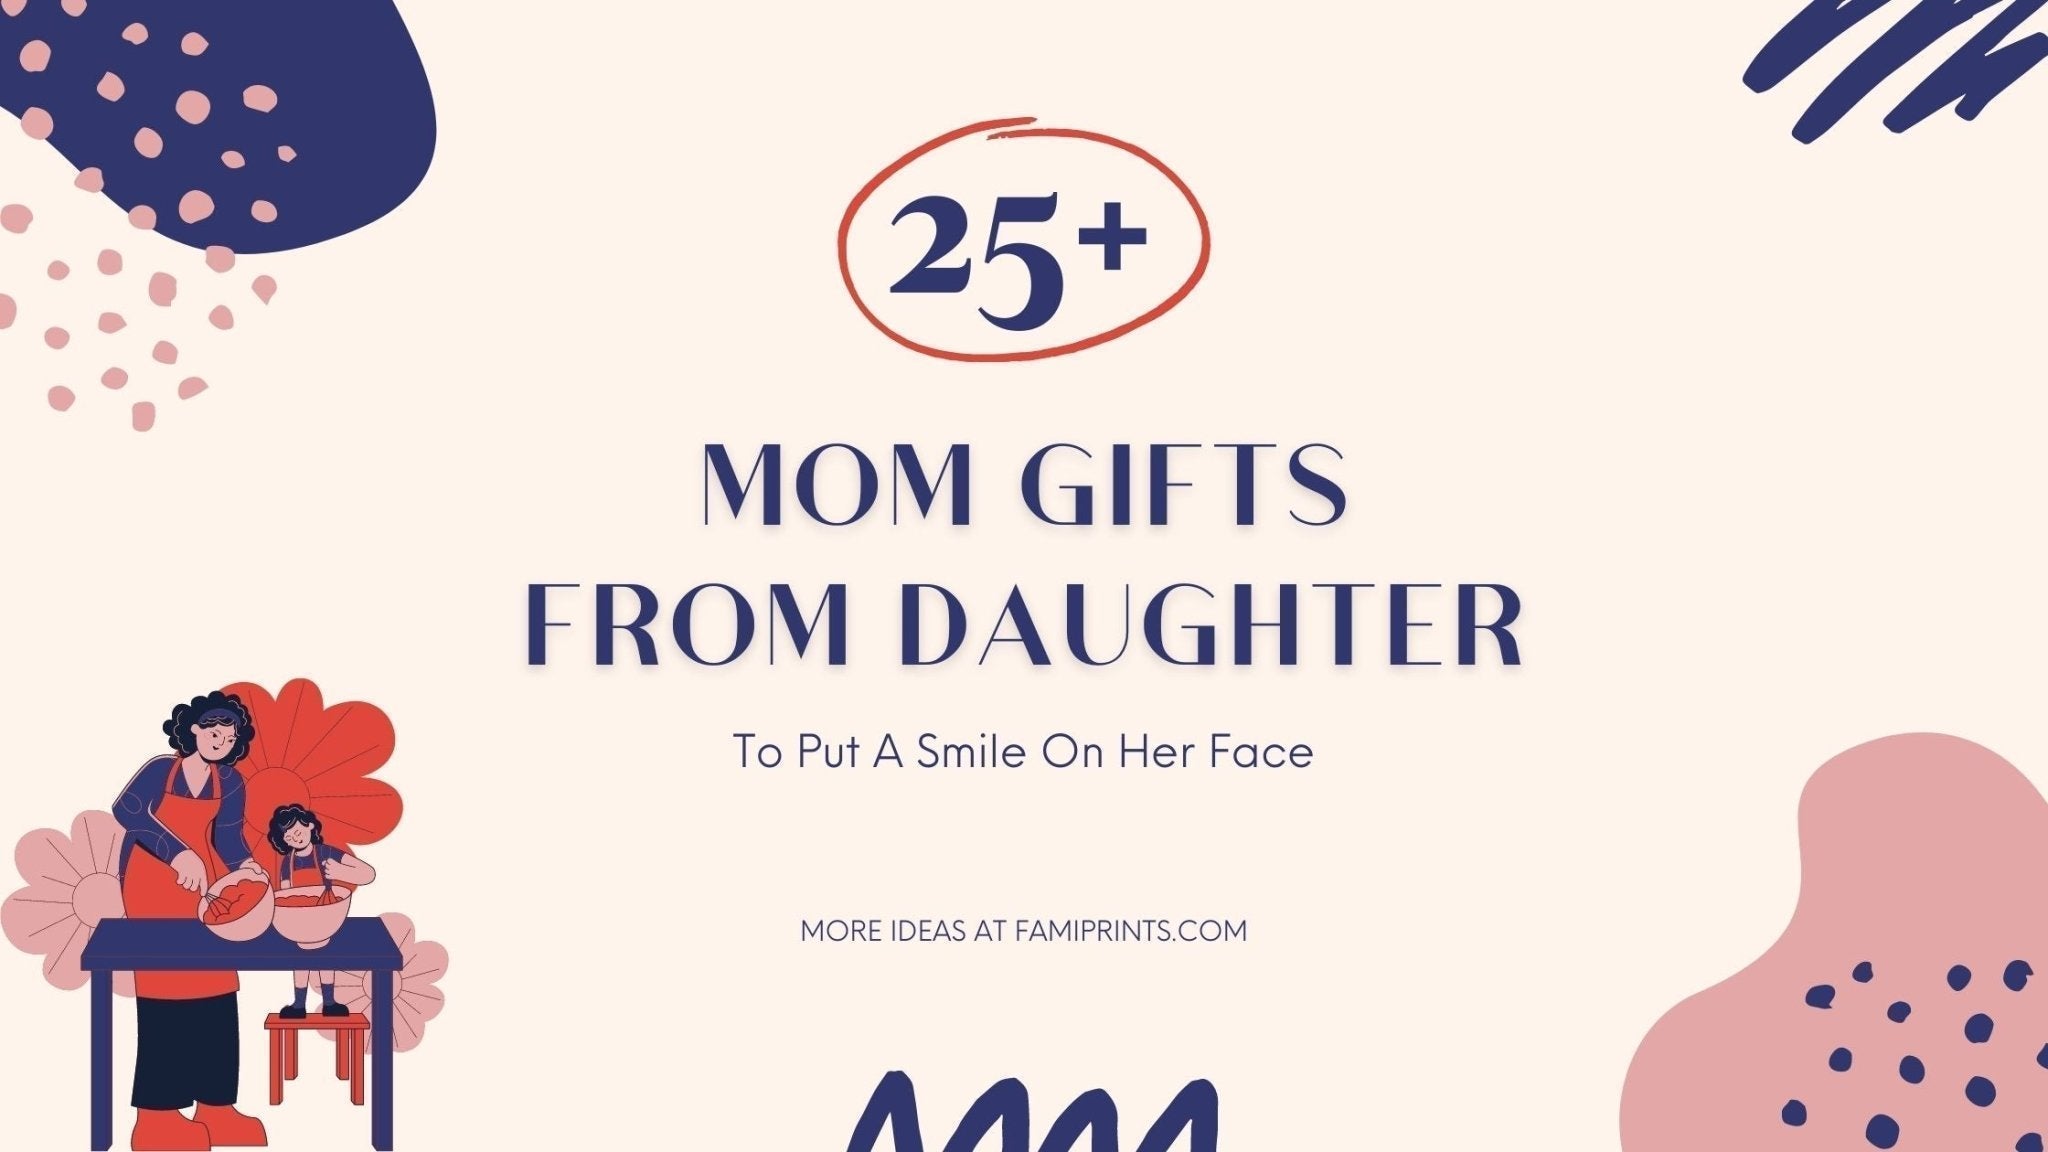 http://famiprints.com/cdn/shop/articles/25-awesome-mom-gifts-from-daughter-to-put-a-smile-on-her-face-763464.jpg?v=1659863410